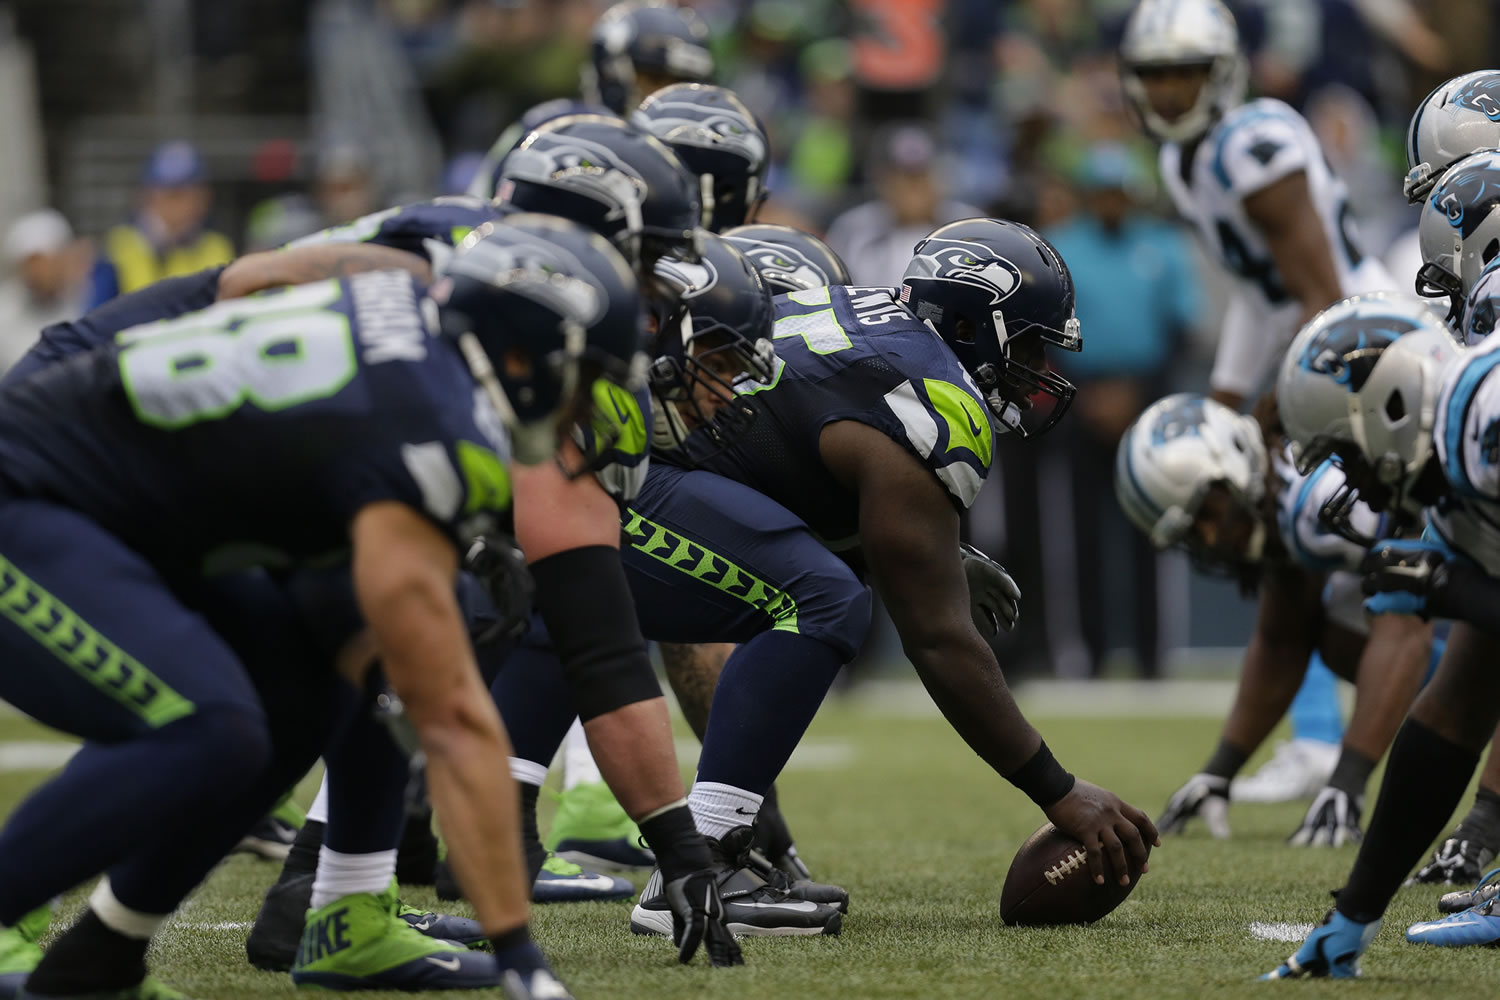 Seattle Seahawks center Patrick Lewis gets set to snap the ball on the line of scrimmage against the Carolina Panthers in the second half of an NFL football game, Sunday, Oct. 18, 2015, in Seattle.